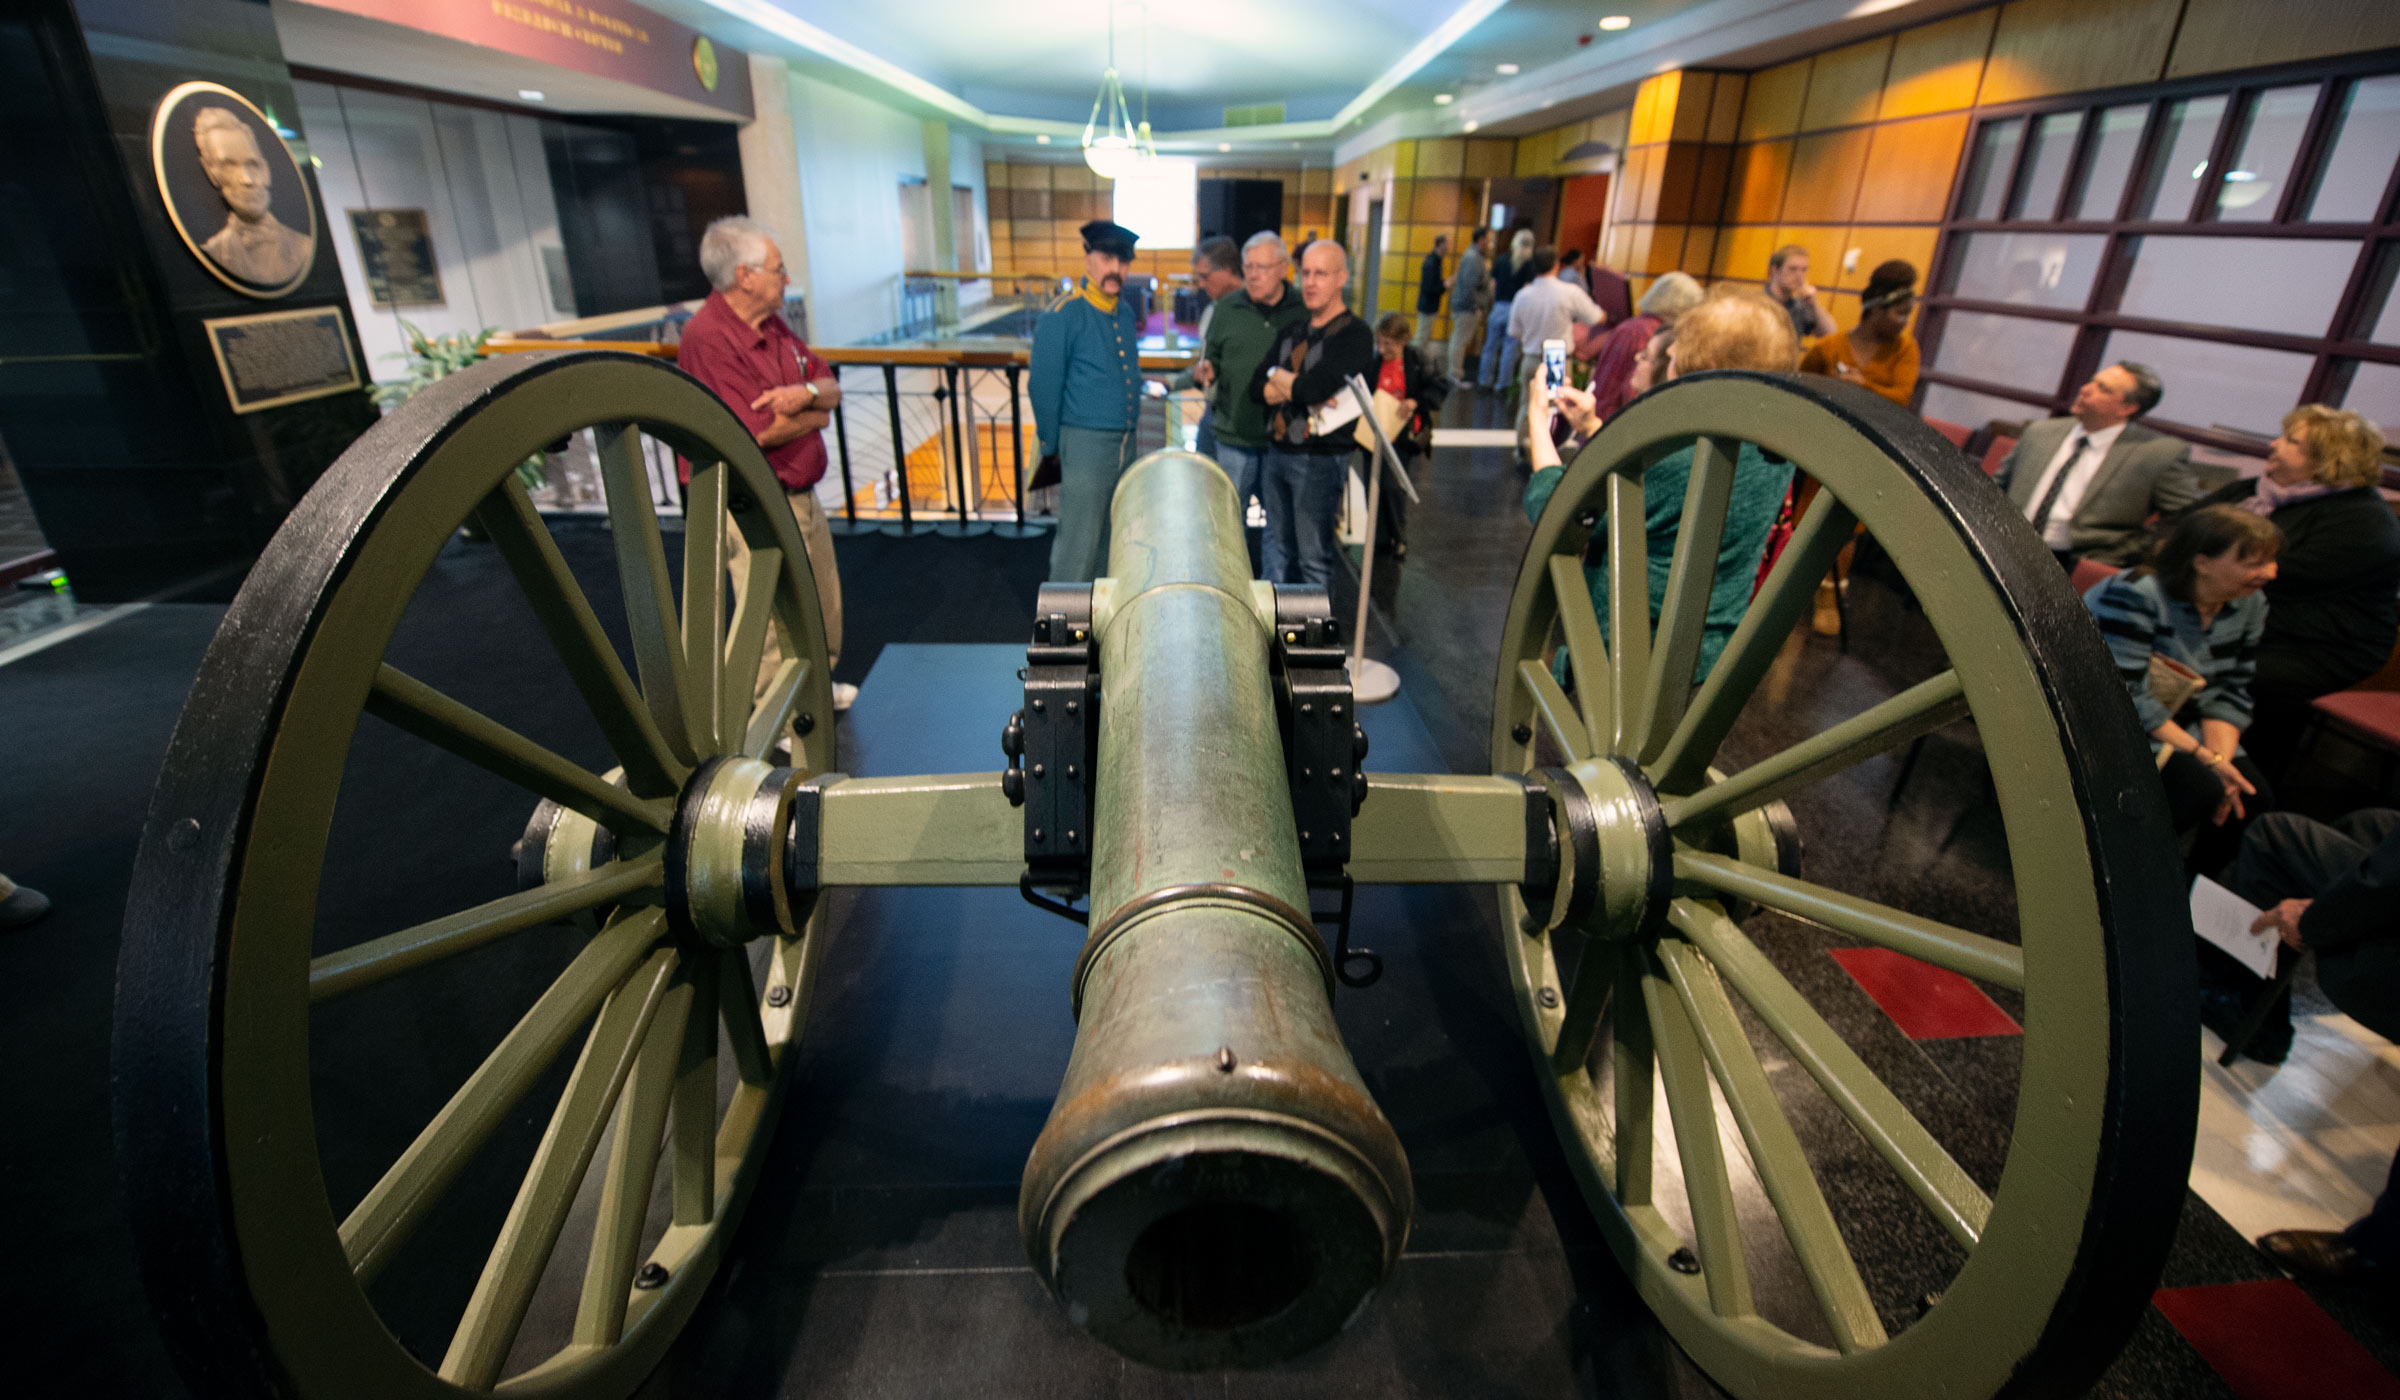 With the freshly unveiled 19th Century cannon in the foreground, Library visitors admire the new addition.